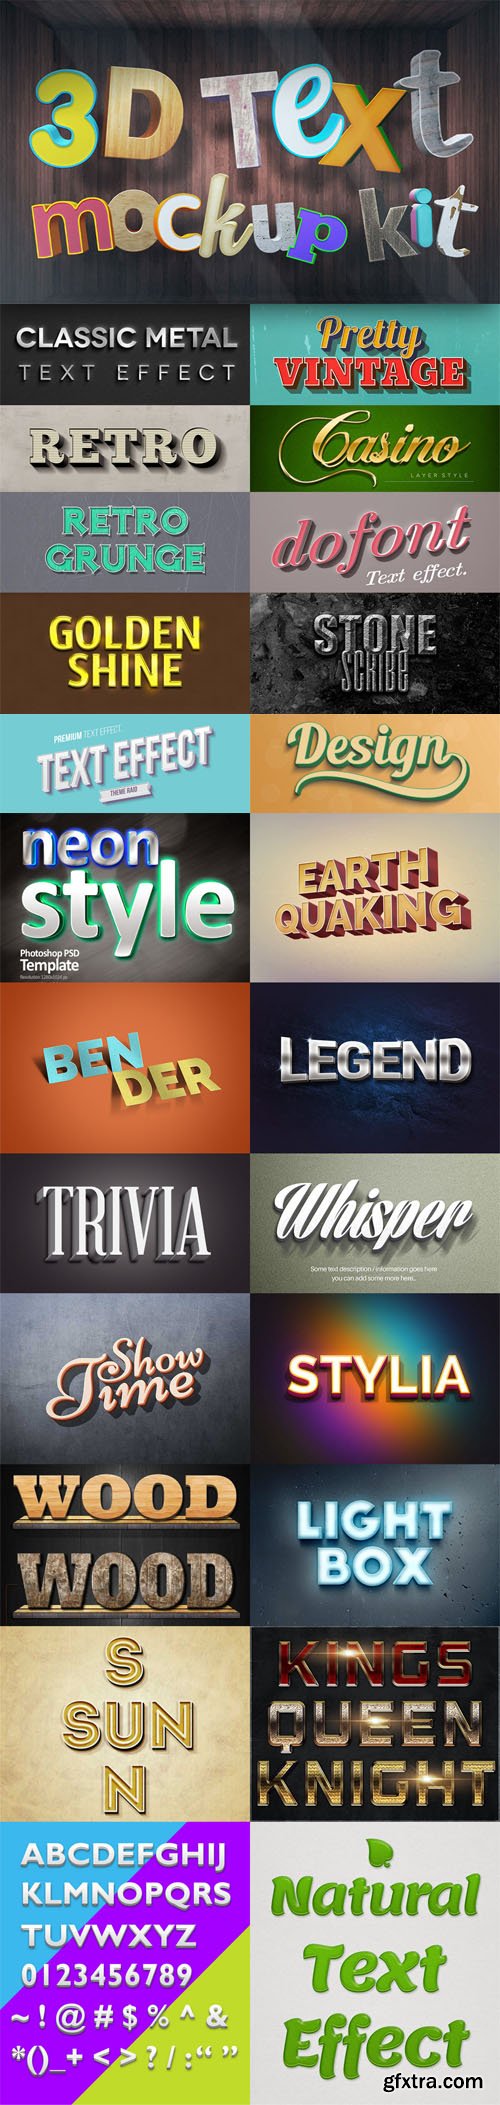 22 Photoshop Text Effects to Create Easy Text Styles